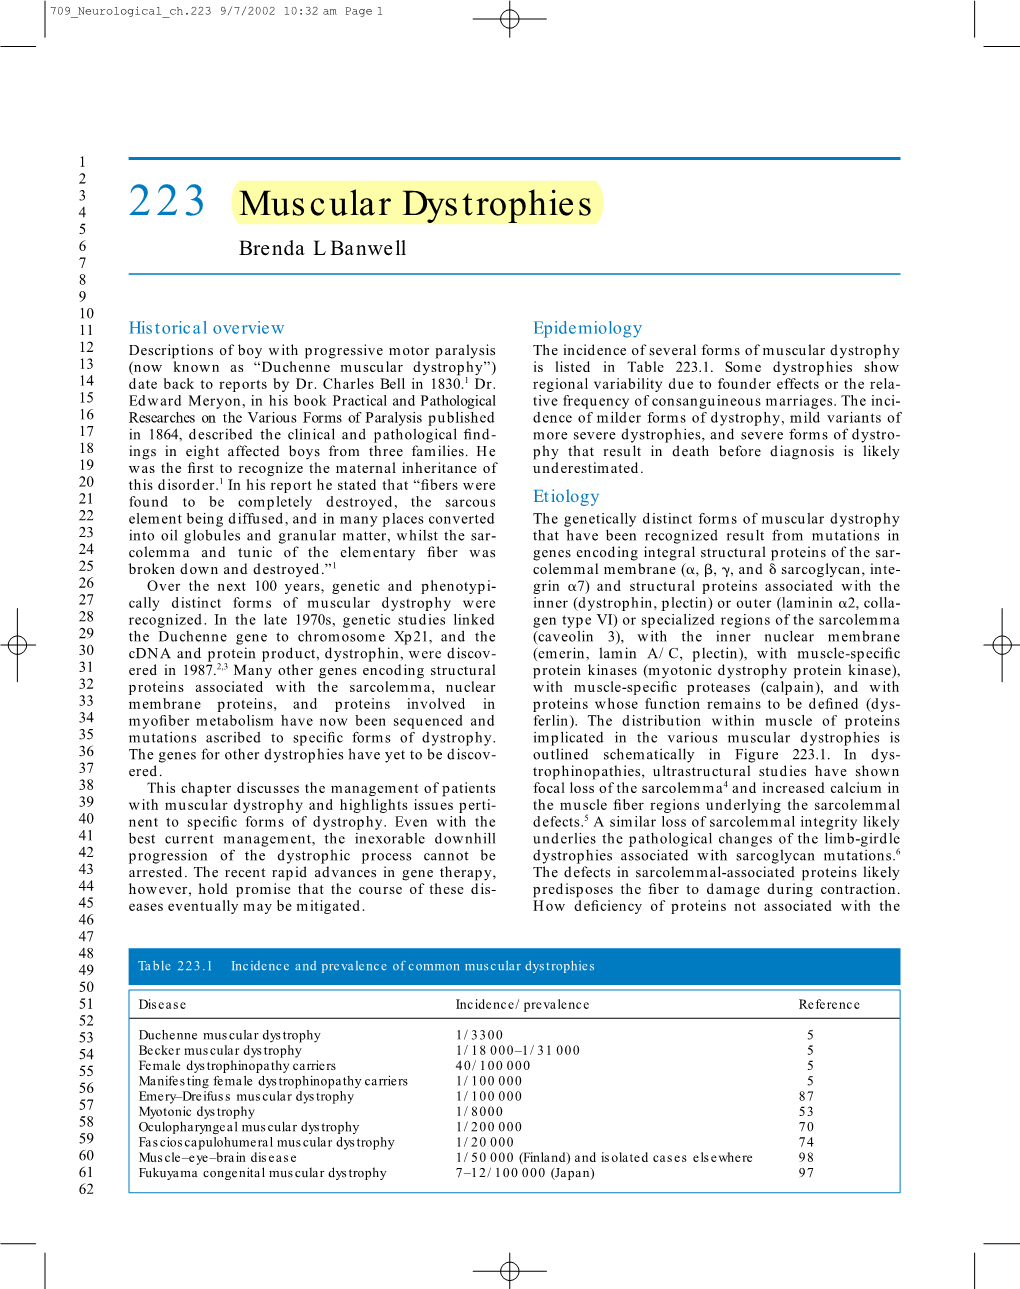 223 Muscular Dystrophies